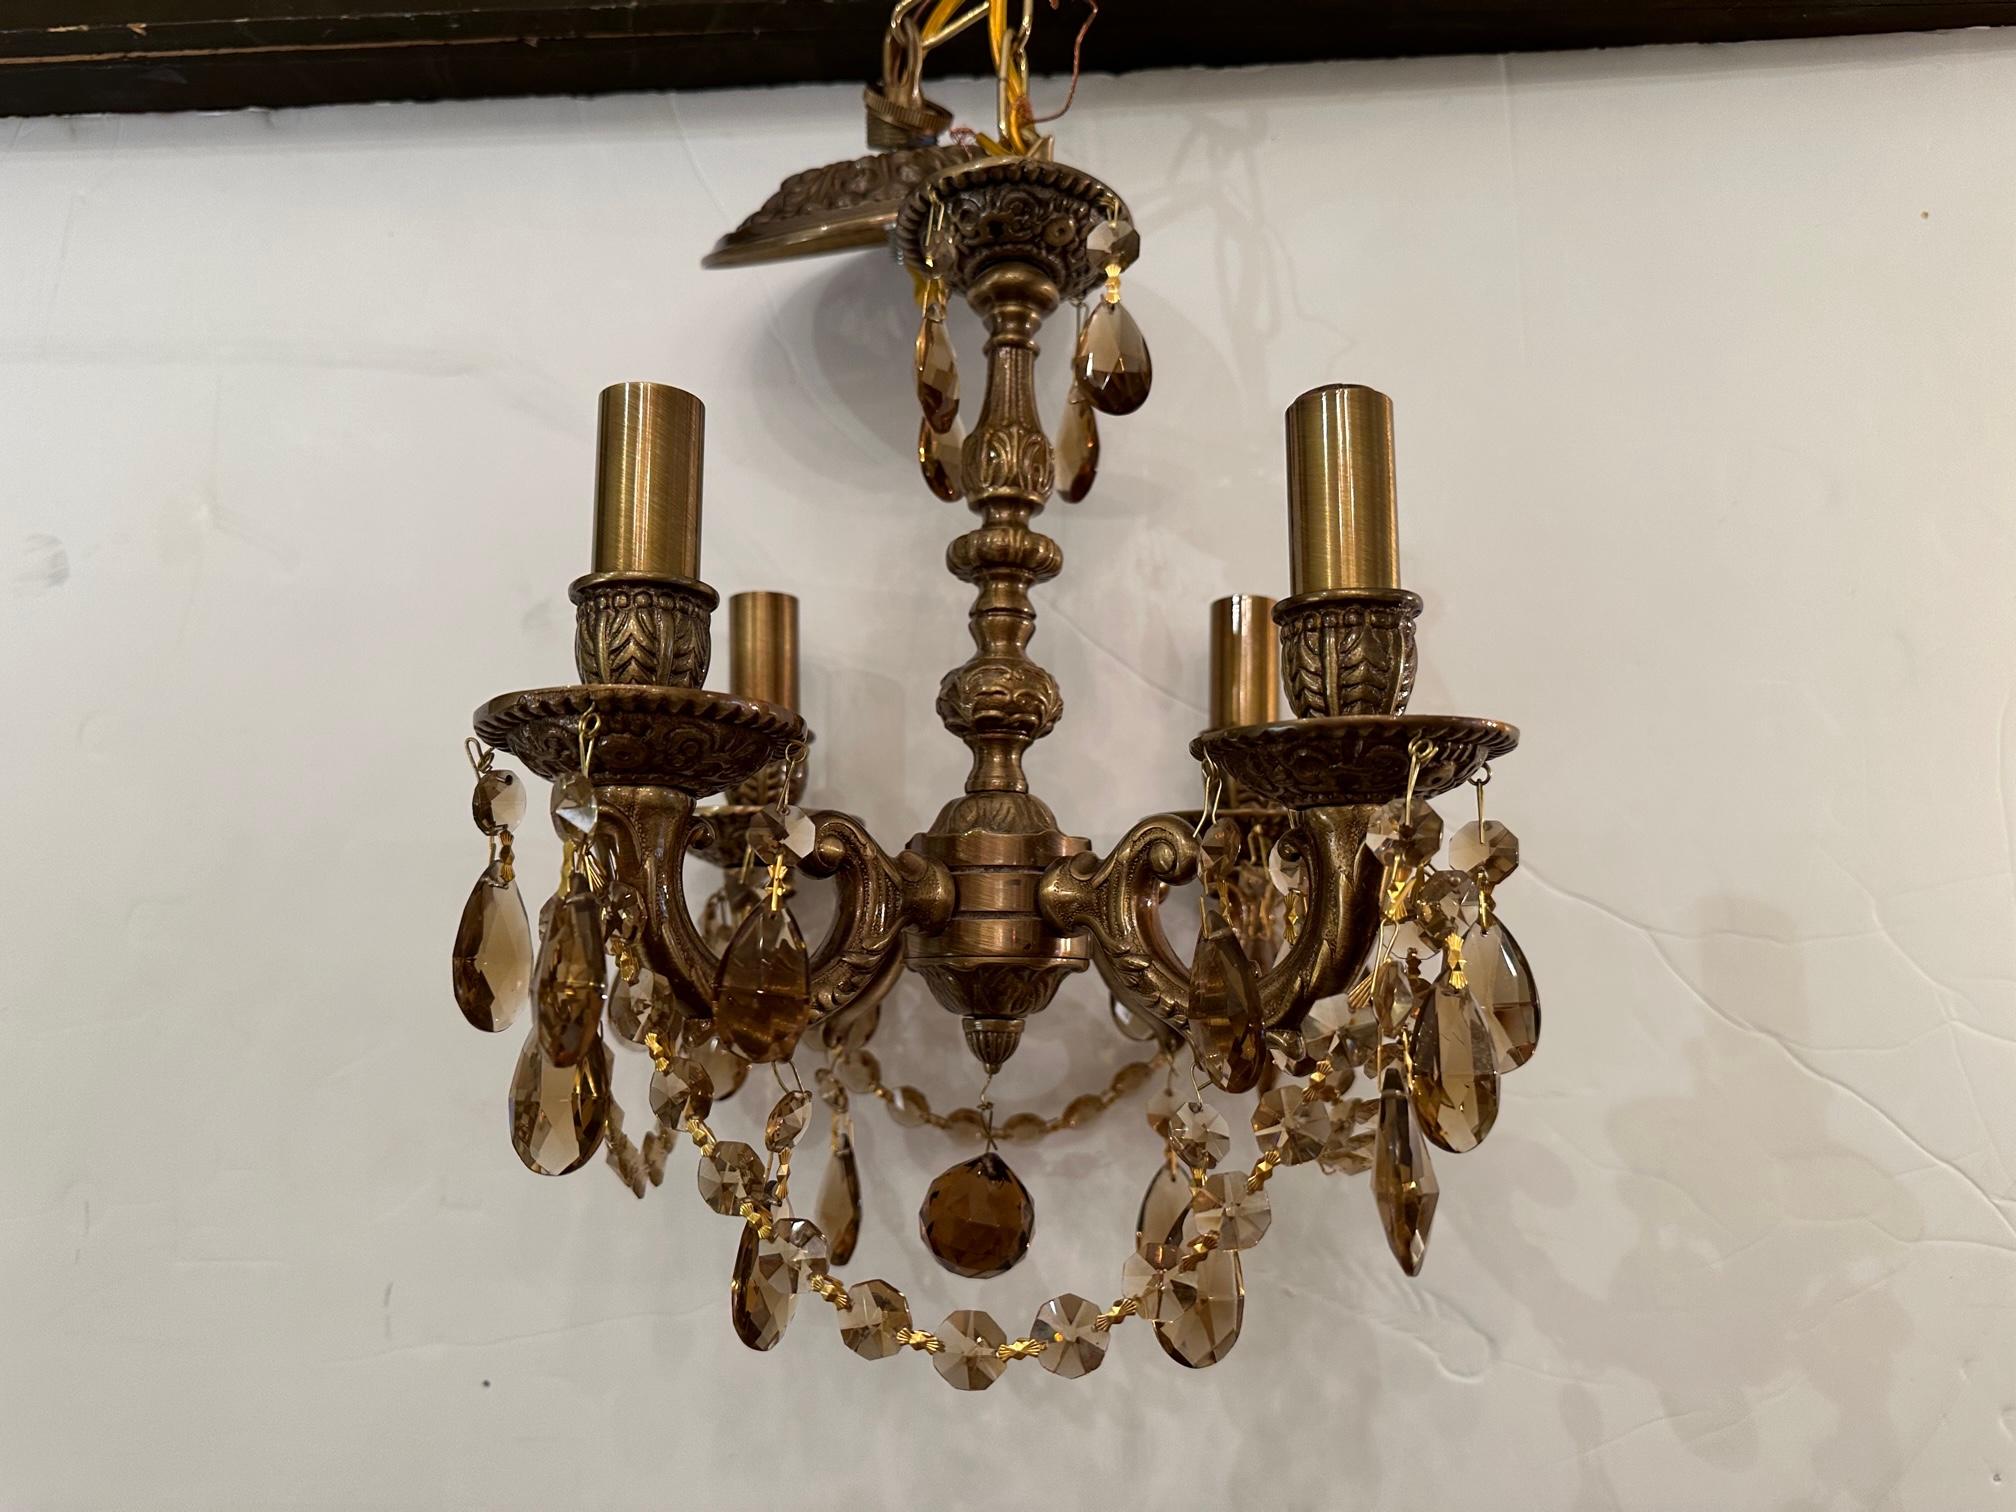 Lovely small brass vintage 4 arm chandelier with lovely amber crystals.
8 